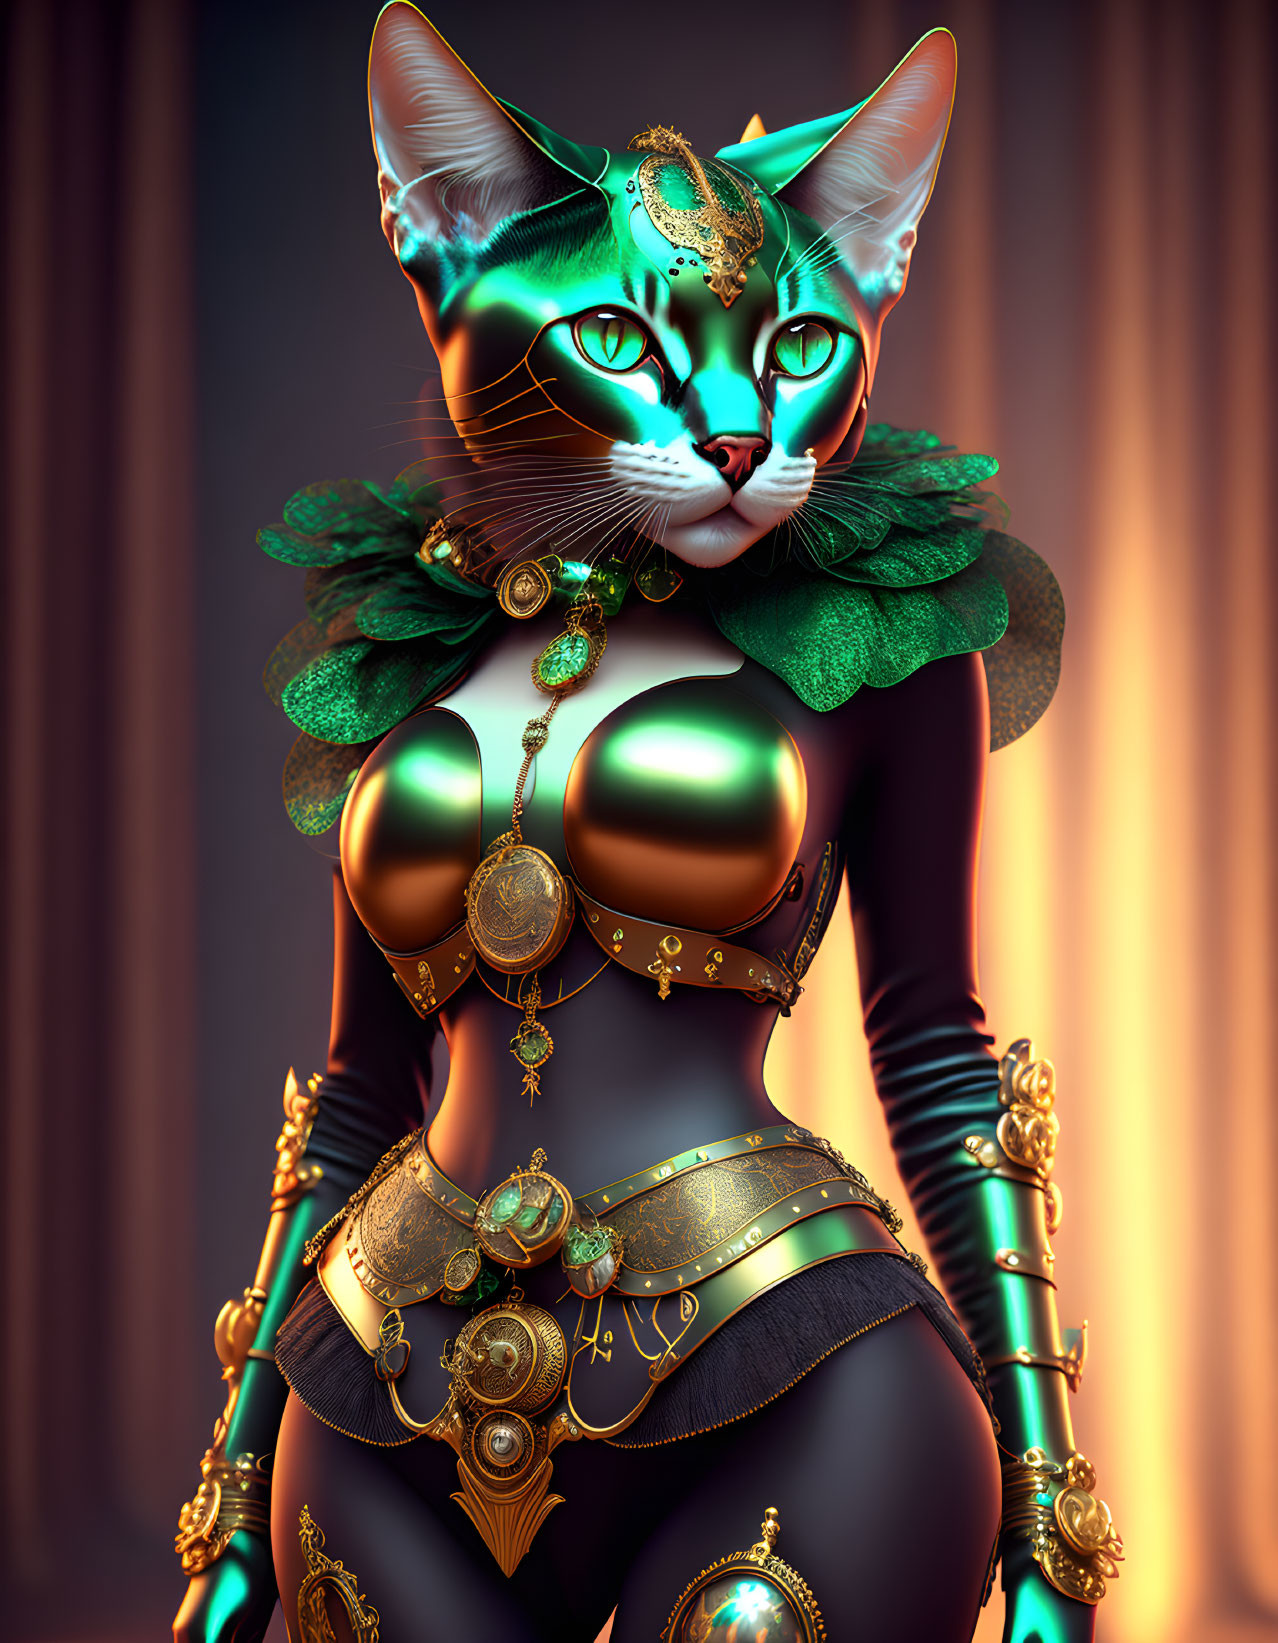 Anthropomorphic feline character with blue eyes and golden jewelry on amber backdrop